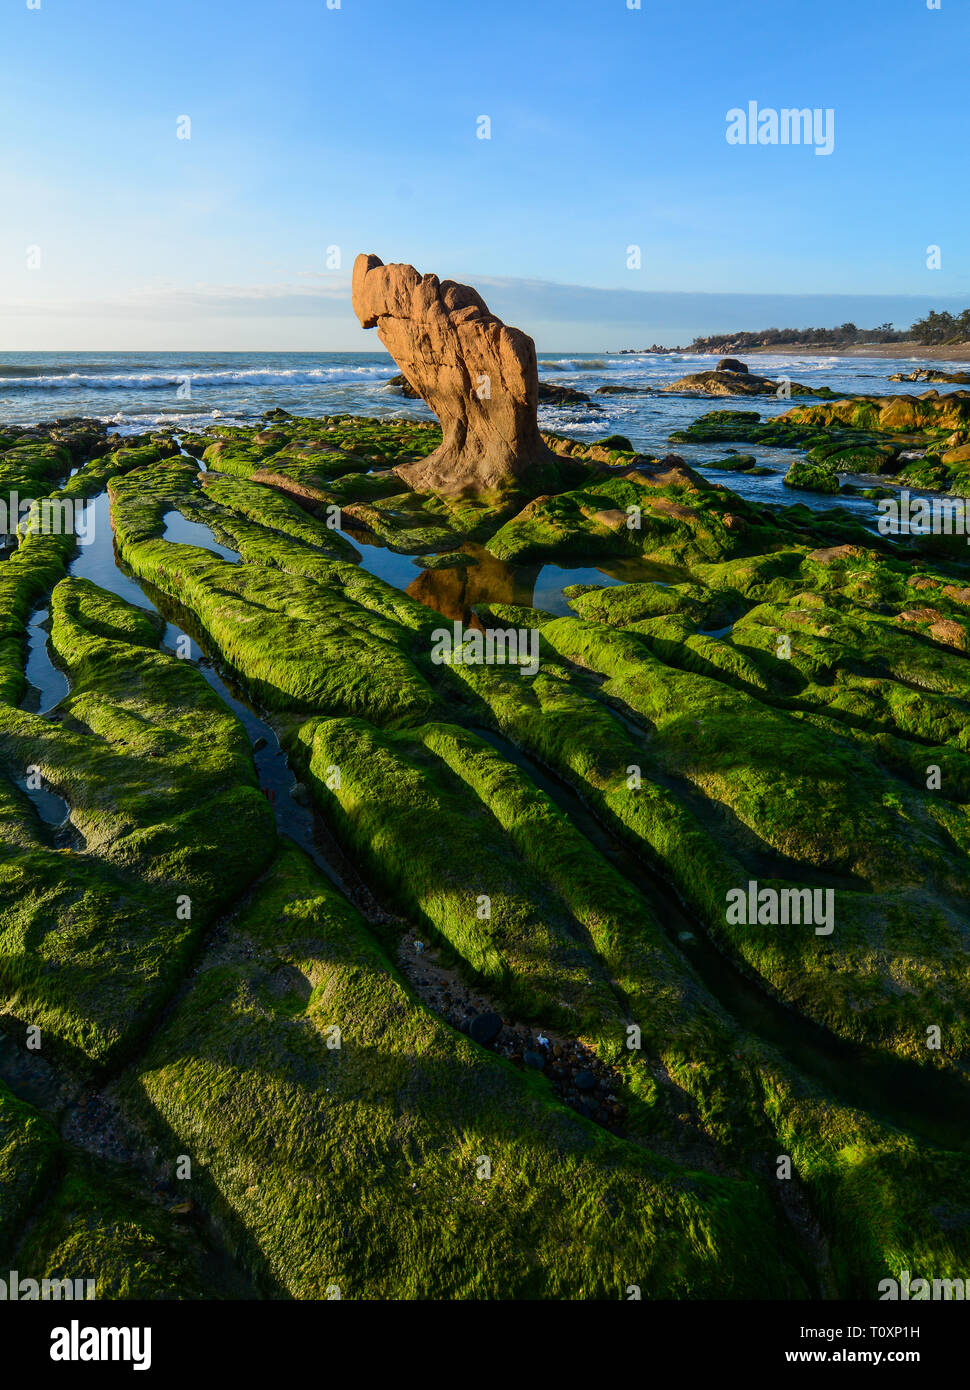 Green algae on a rock in the middle of the sea. South China Sea in Vietnam. Stock Photo